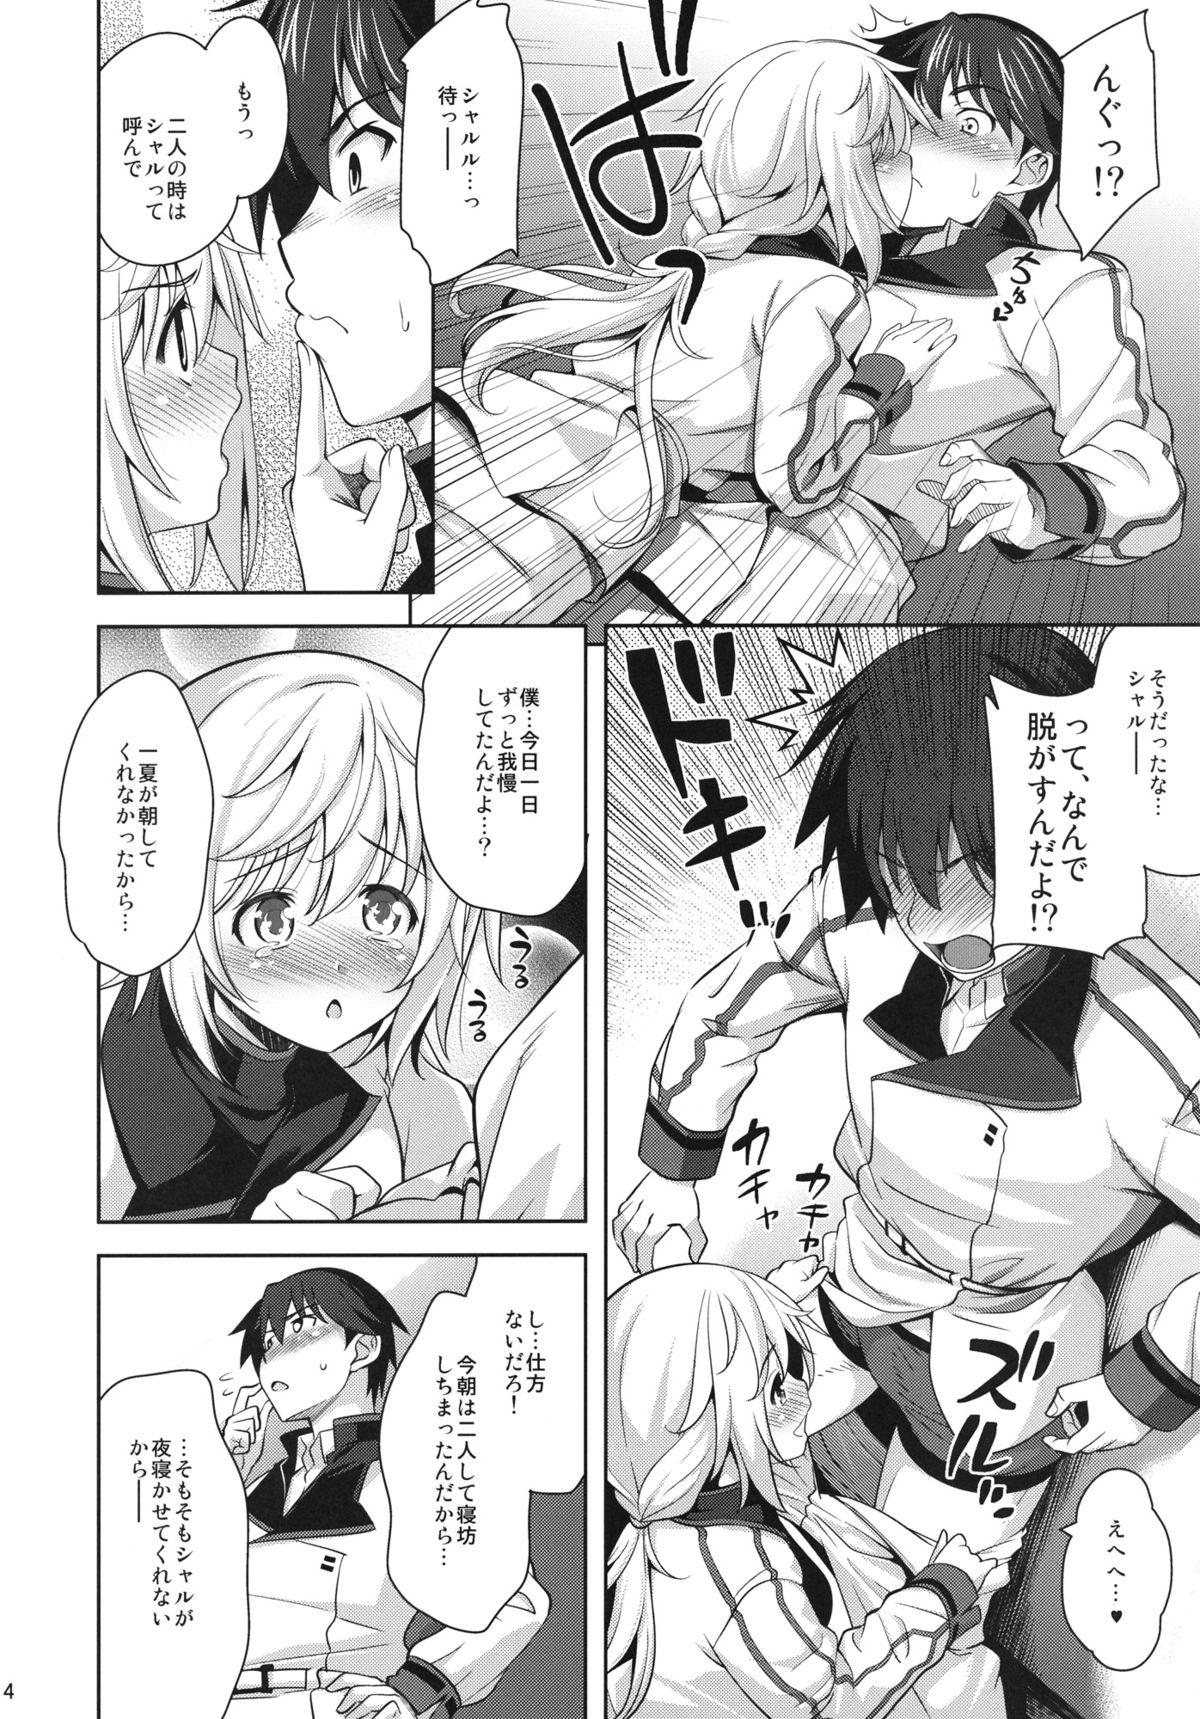 Gostoso Shall we...? - Infinite stratos Insertion - Page 6